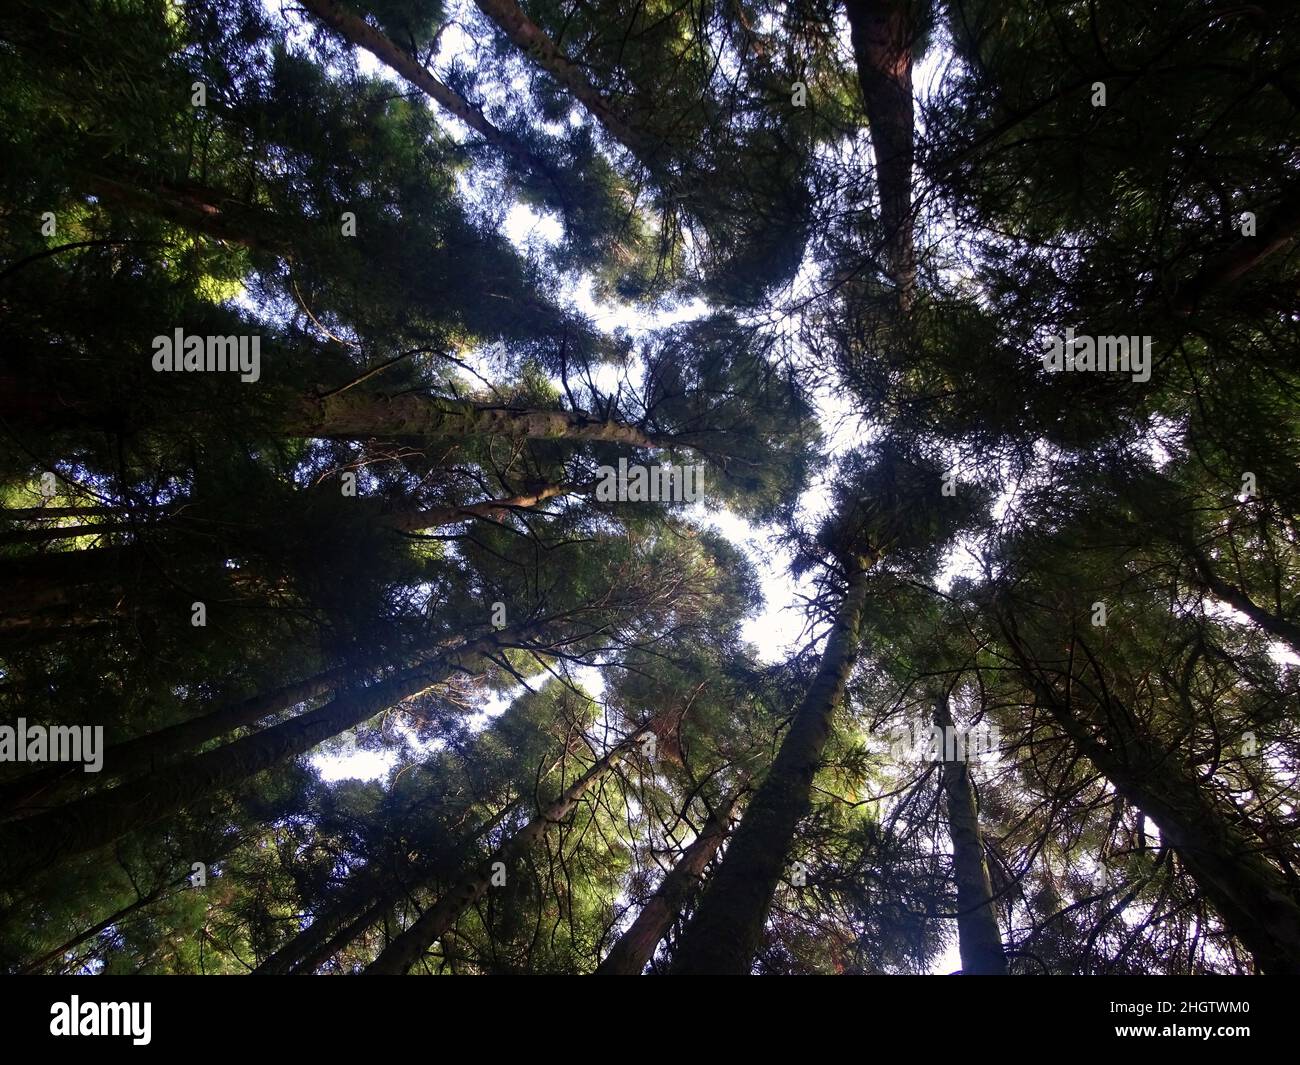 Japanese cedar, view from bottom to top, sky in background. Stock Photo